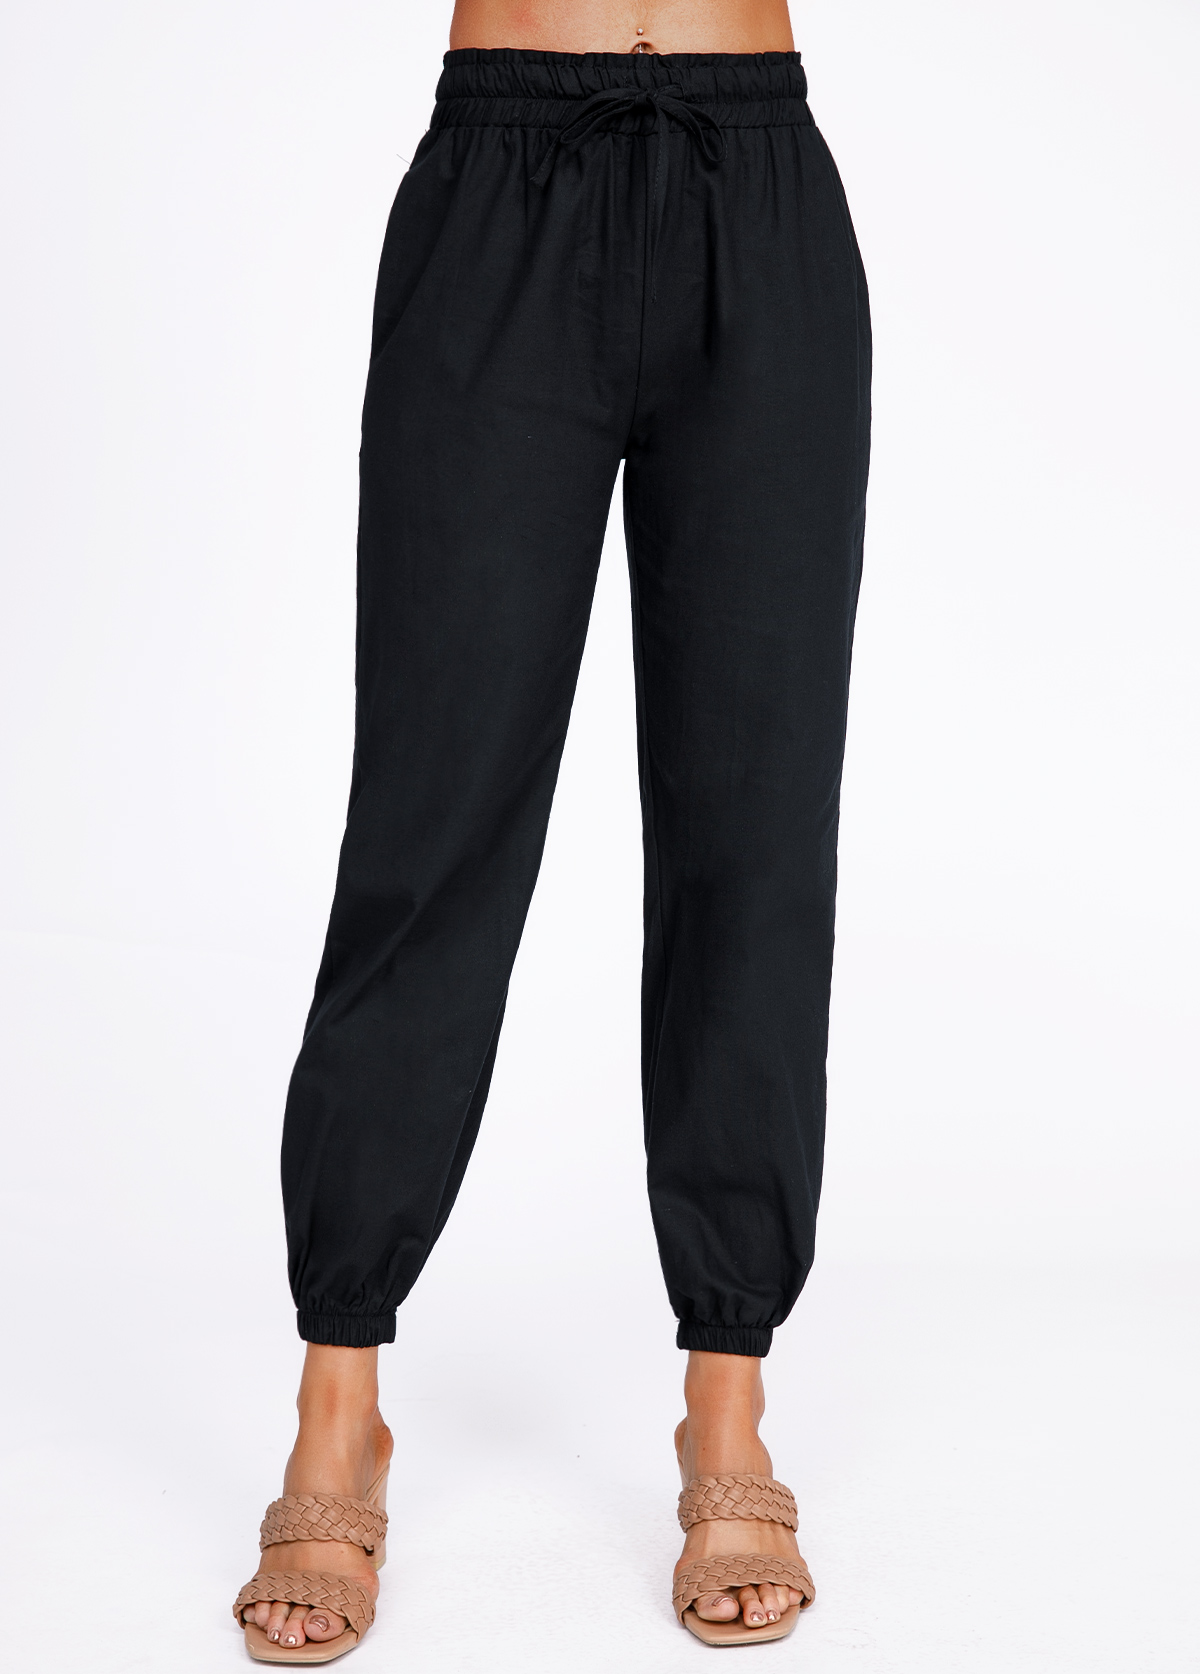 Drawstring Black High Waisted Belted Pants